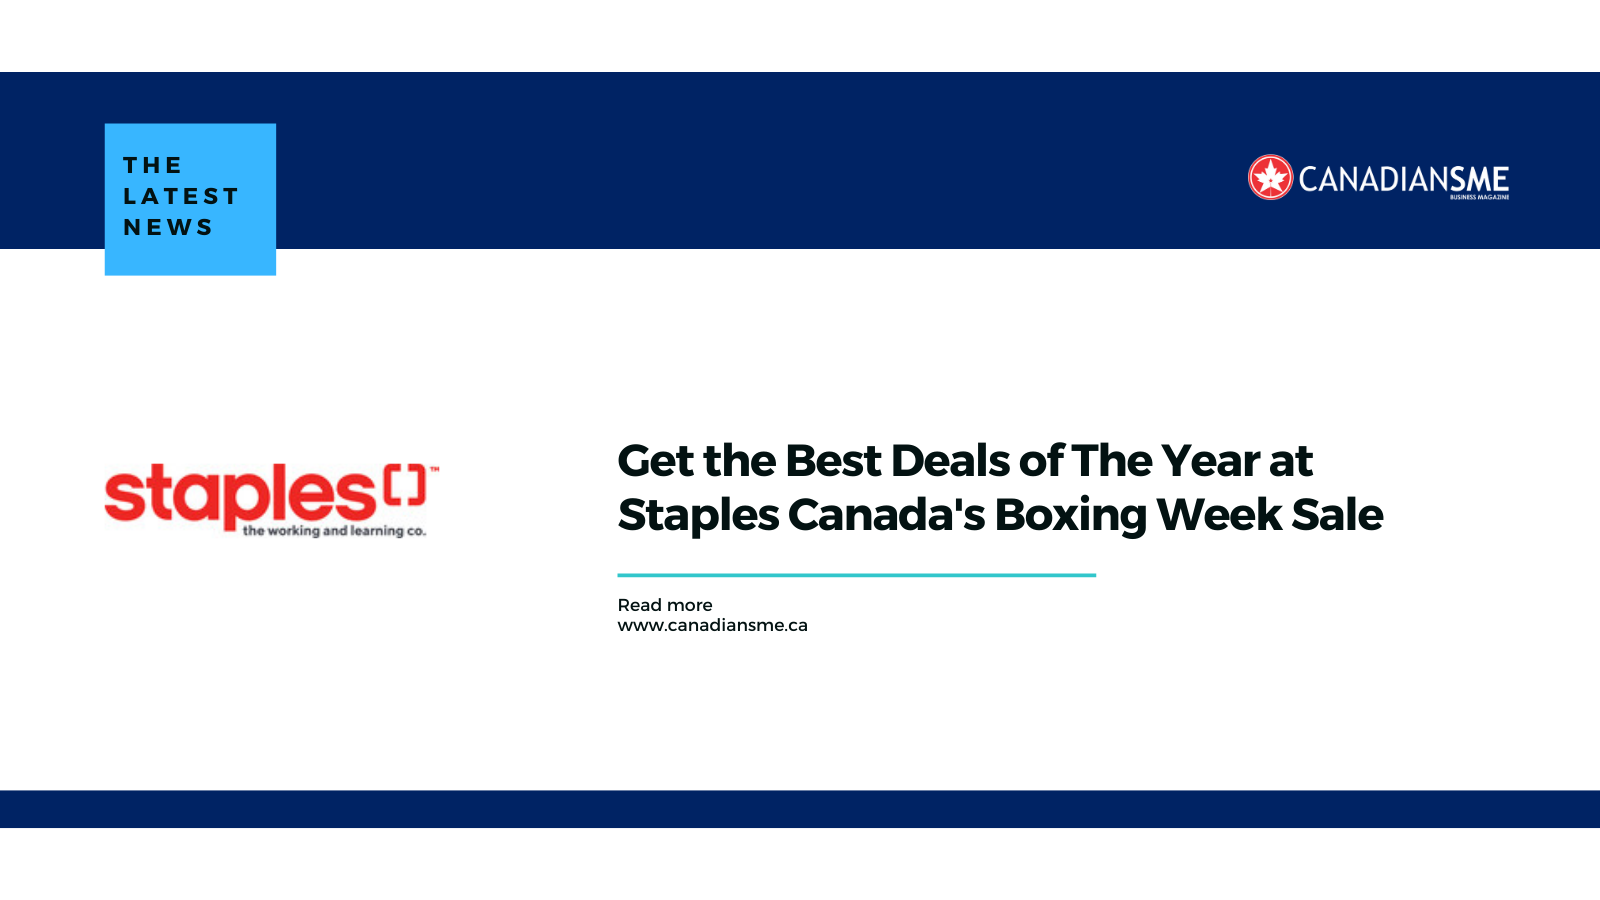 Get the Best Deals of The Year at Staples Canada's Boxing Week Sale